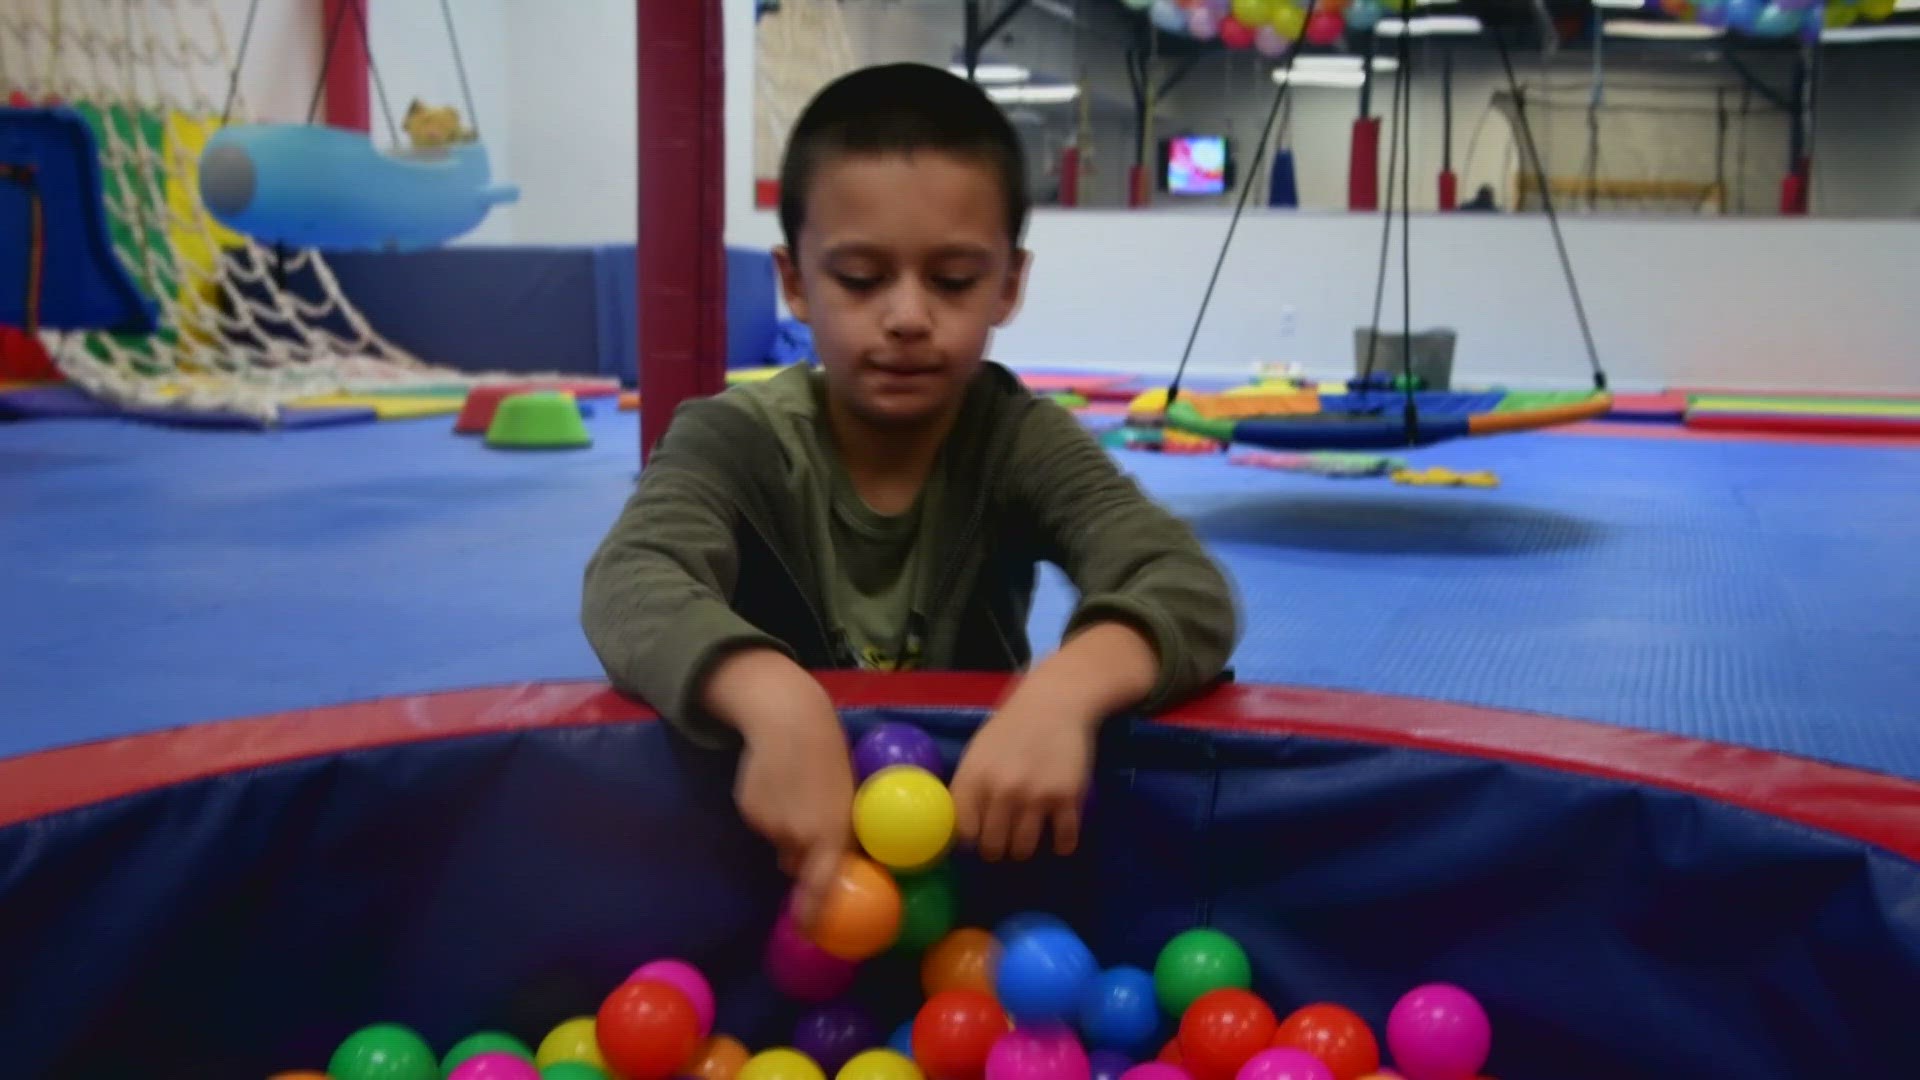 St. Louis is home to a very special indoor playground where every child is welcome.  Anthony Slaughter and his new buddy, Remington, tested it out.